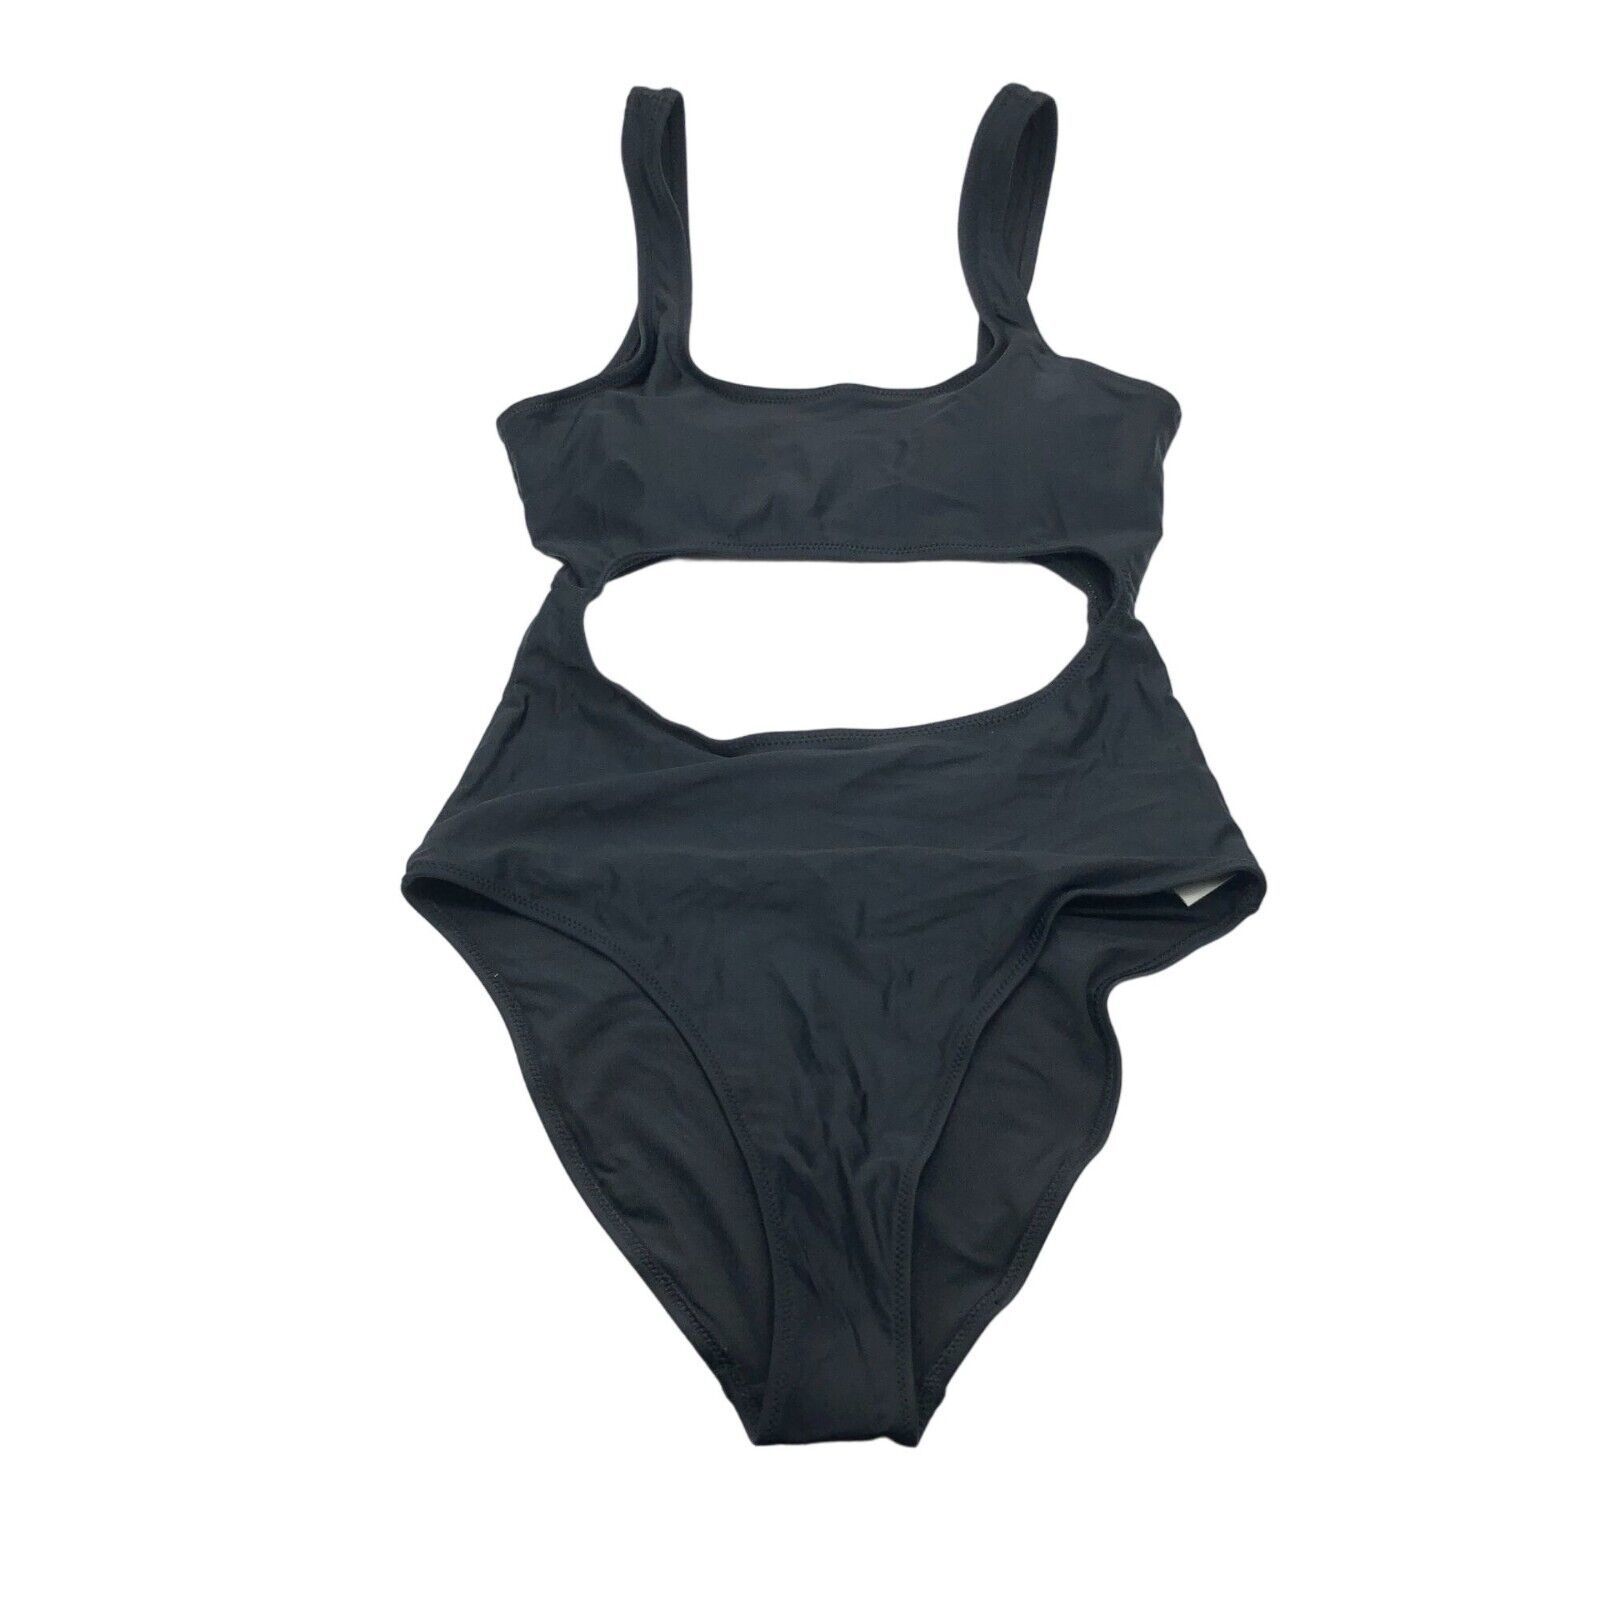 Primary image for Aerie One Piece Swimsuit Cheeky Cutouts Square Neck Black S